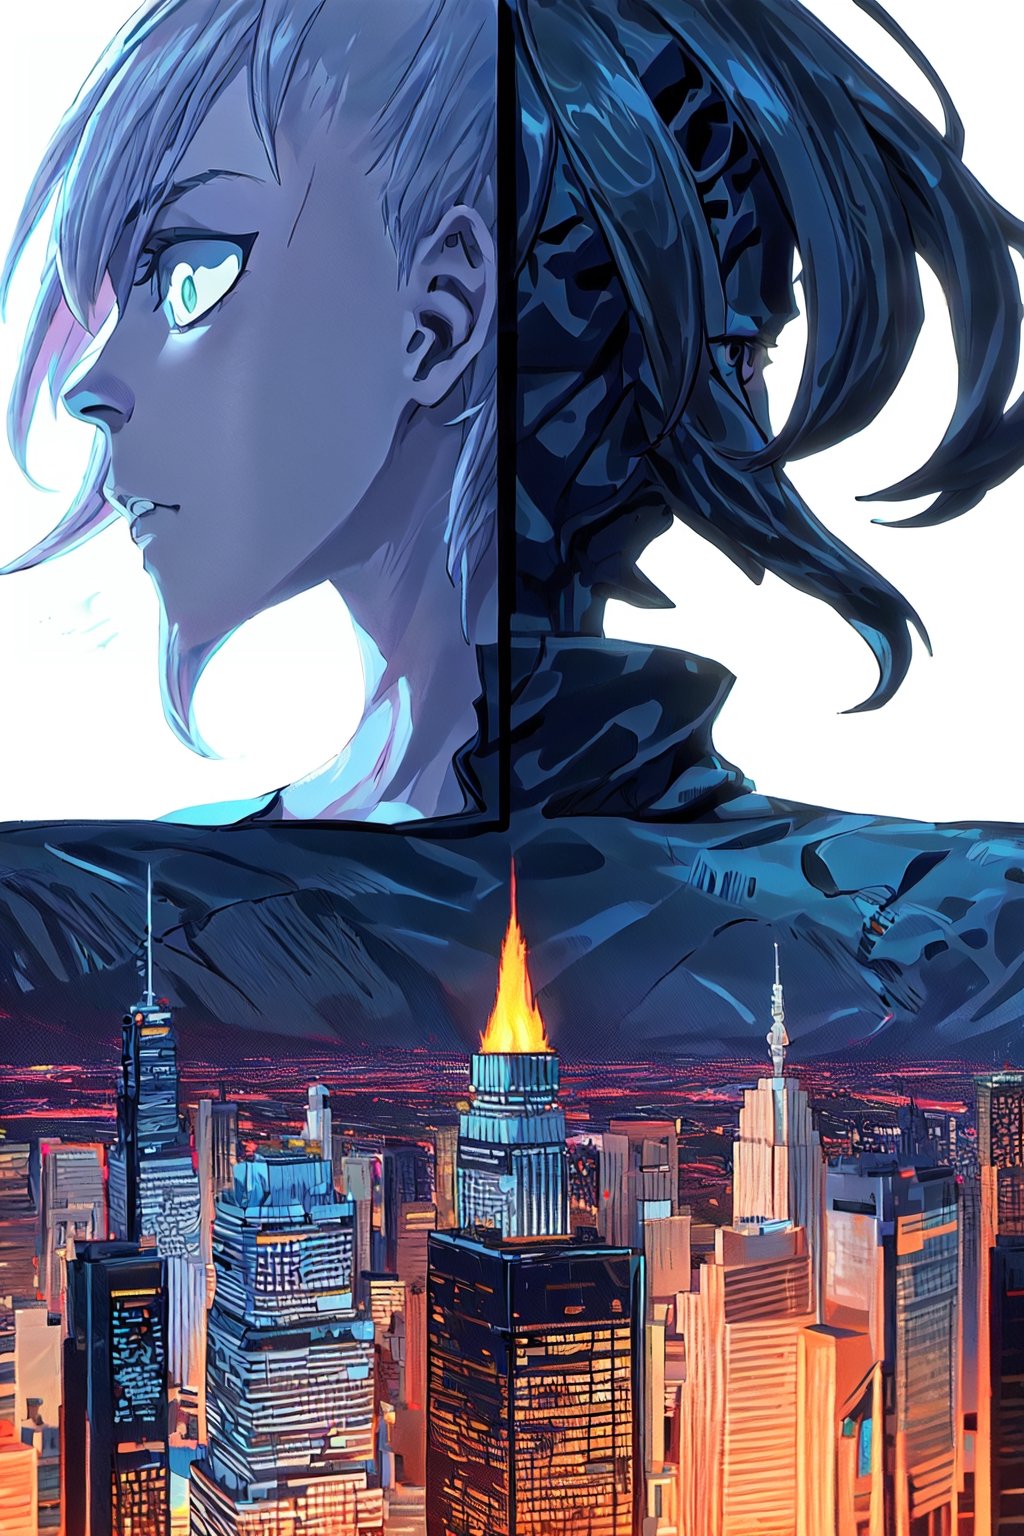 A digital illustration of a ((("Sci-Fi Anime Boy"))) in a futuristic cyberpunk cityscape. The character should have futuristic cyber enhancements, and the city should be filled with neon lights and advanced technology. The art style should be influenced by classic cyberpunk aesthetics. Use a fish-eye lens for a dynamic, distorted view of the futuristic world and emphasize the character's cool demeanor.